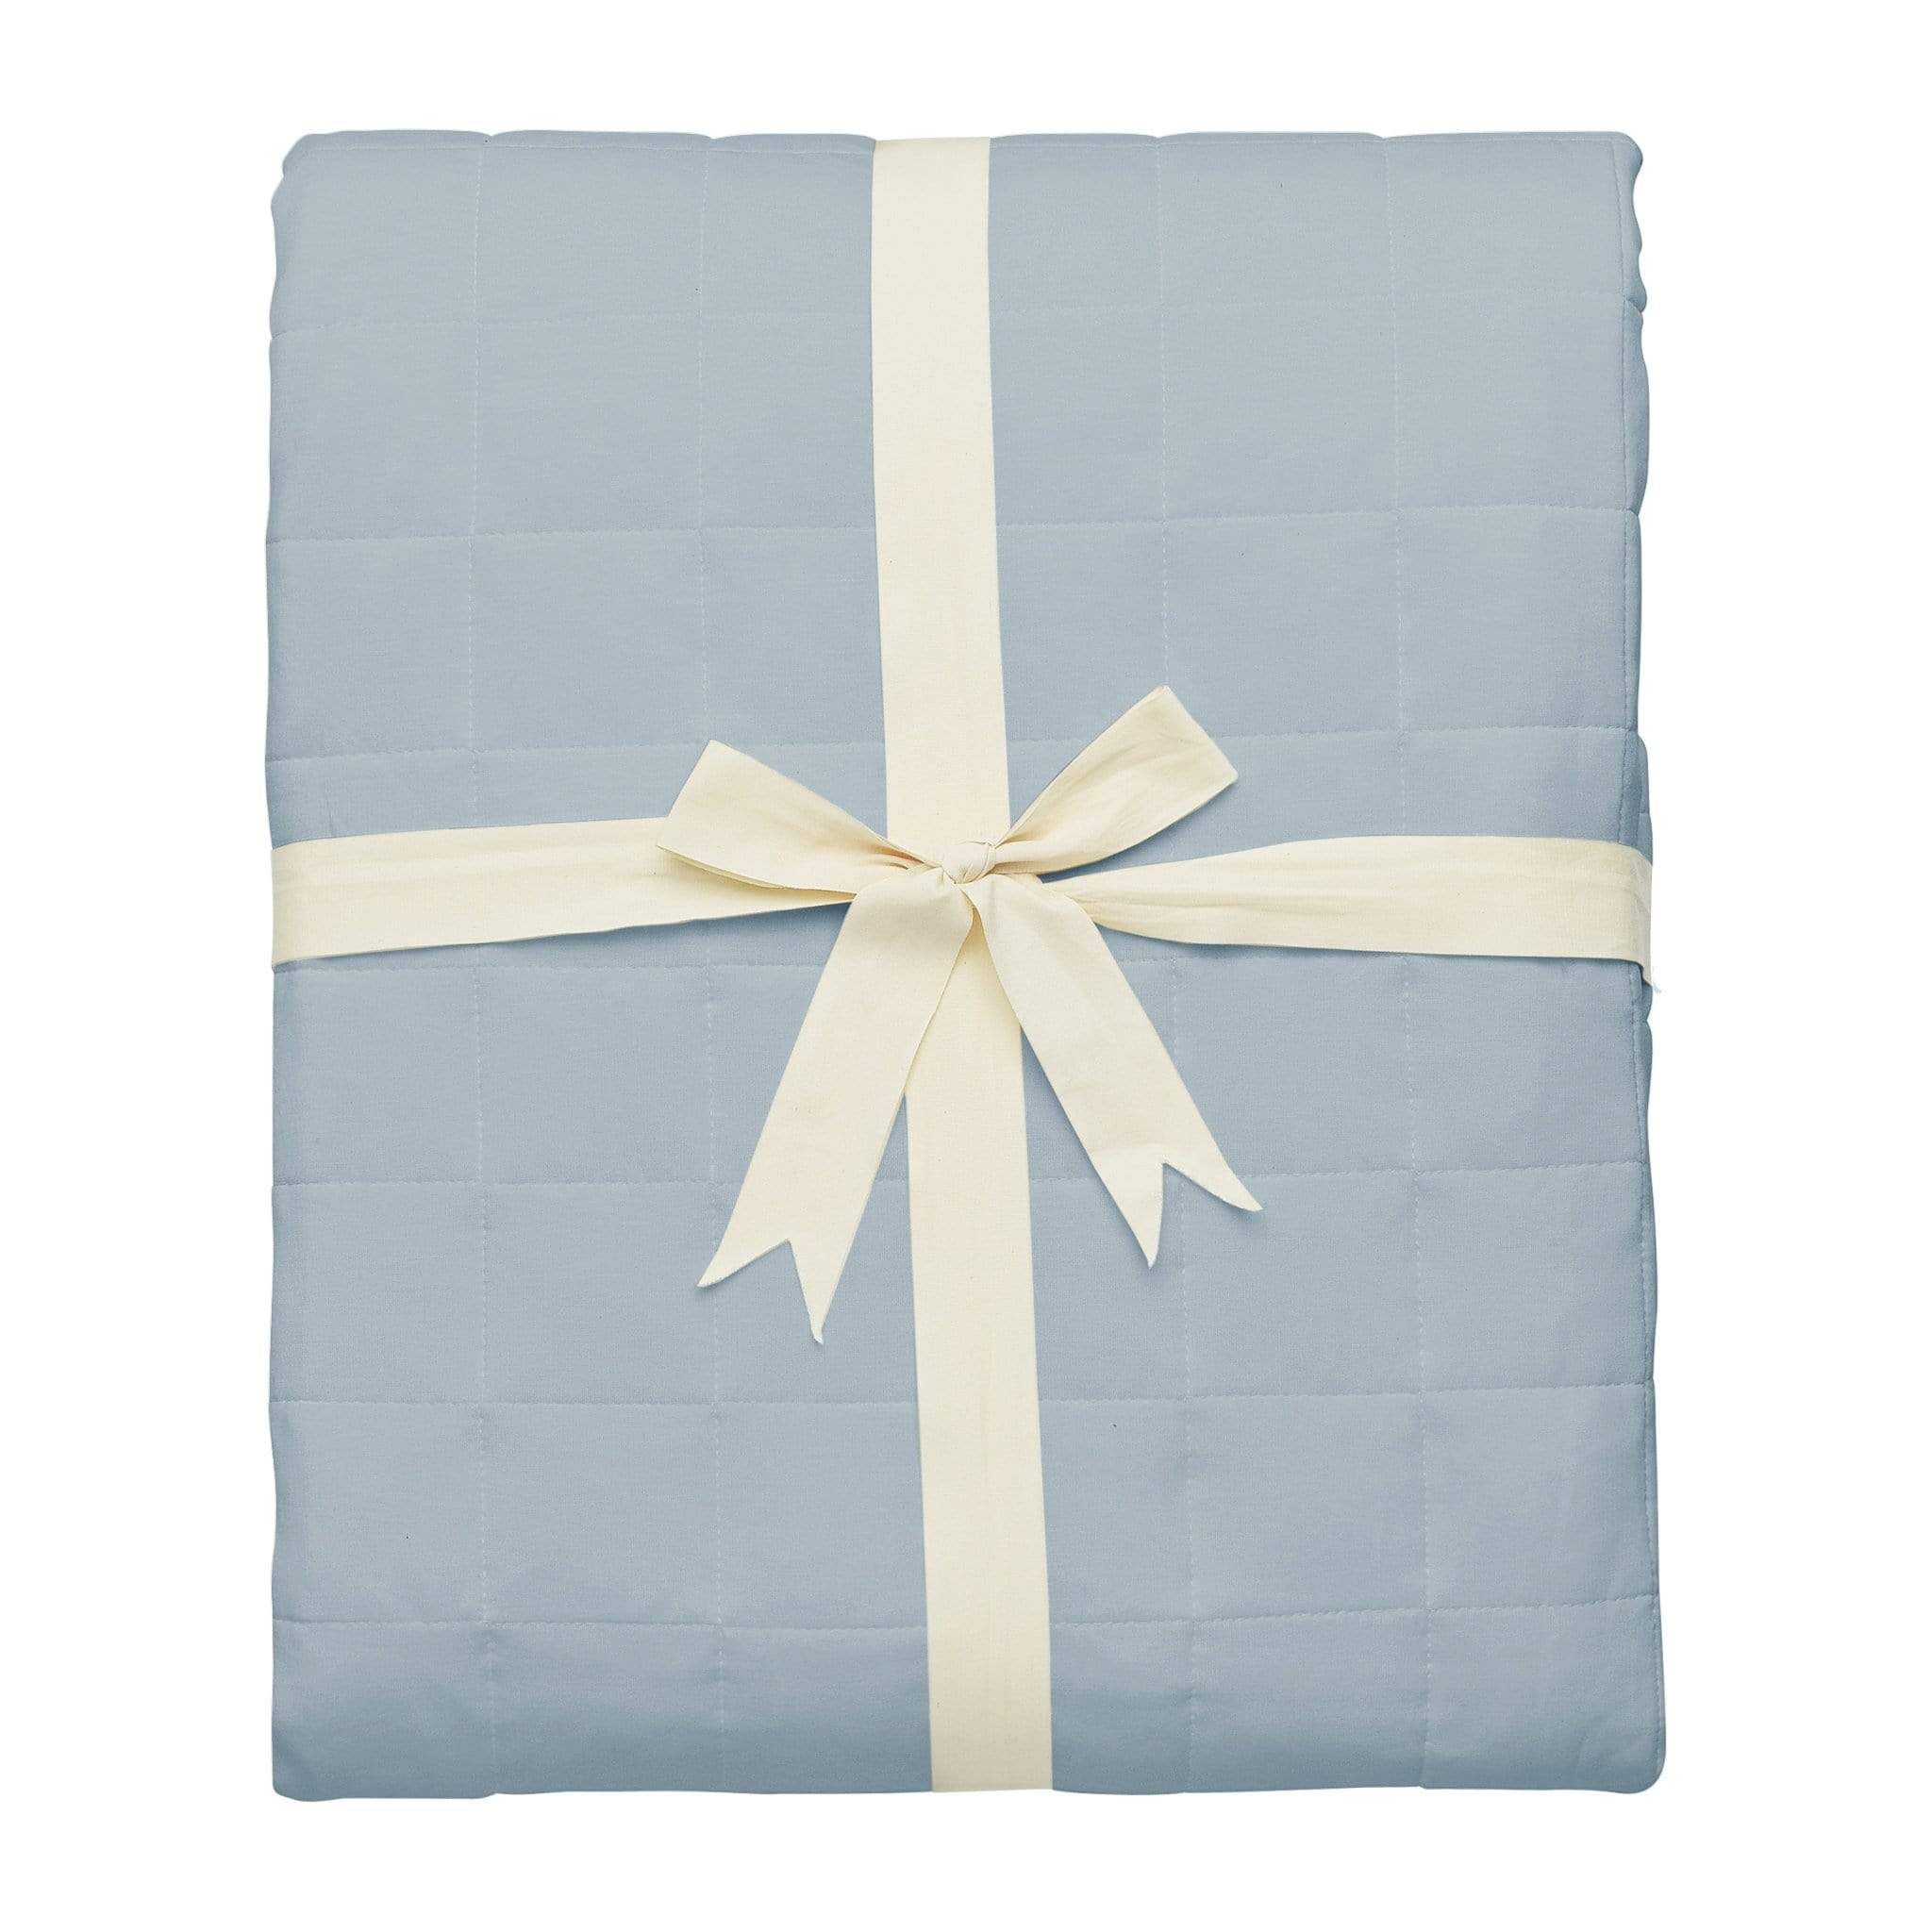 Adult Quilted Blanket in Fog 1.0 | Kyte BABY